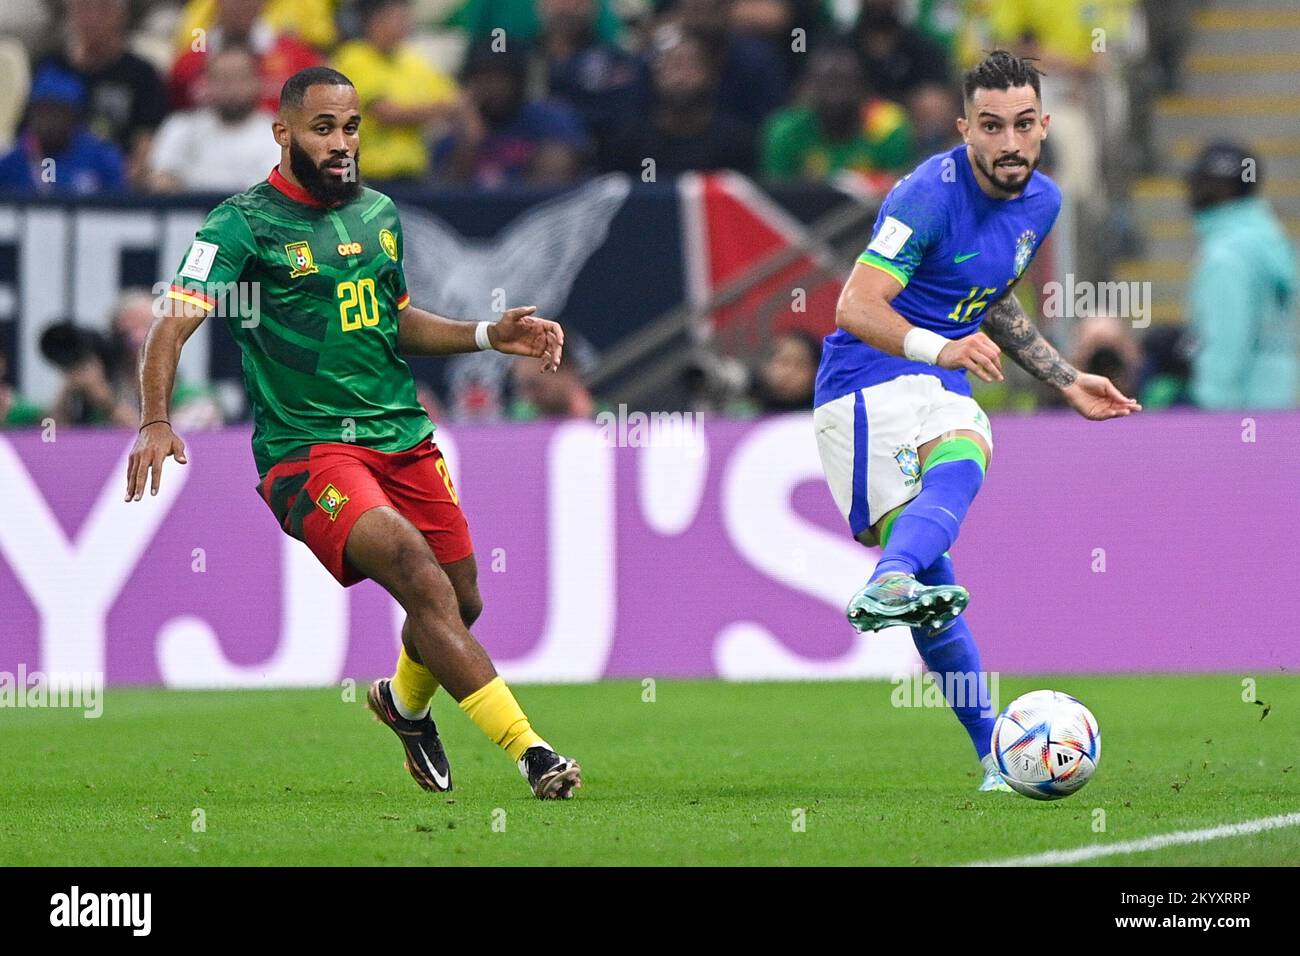 LUSAIL CITY, QATAR - DECEMBER 2: Bryan Mbeumo of Cameroon and Alex Telles of Brazil during the Group G - FIFA World Cup Qatar 2022 match between Cameroon and Brazil at the Lusail Stadium on December 2, 2022 in Lusail City, Qatar (Photo by Pablo Morano/BSR Agency) Stock Photo